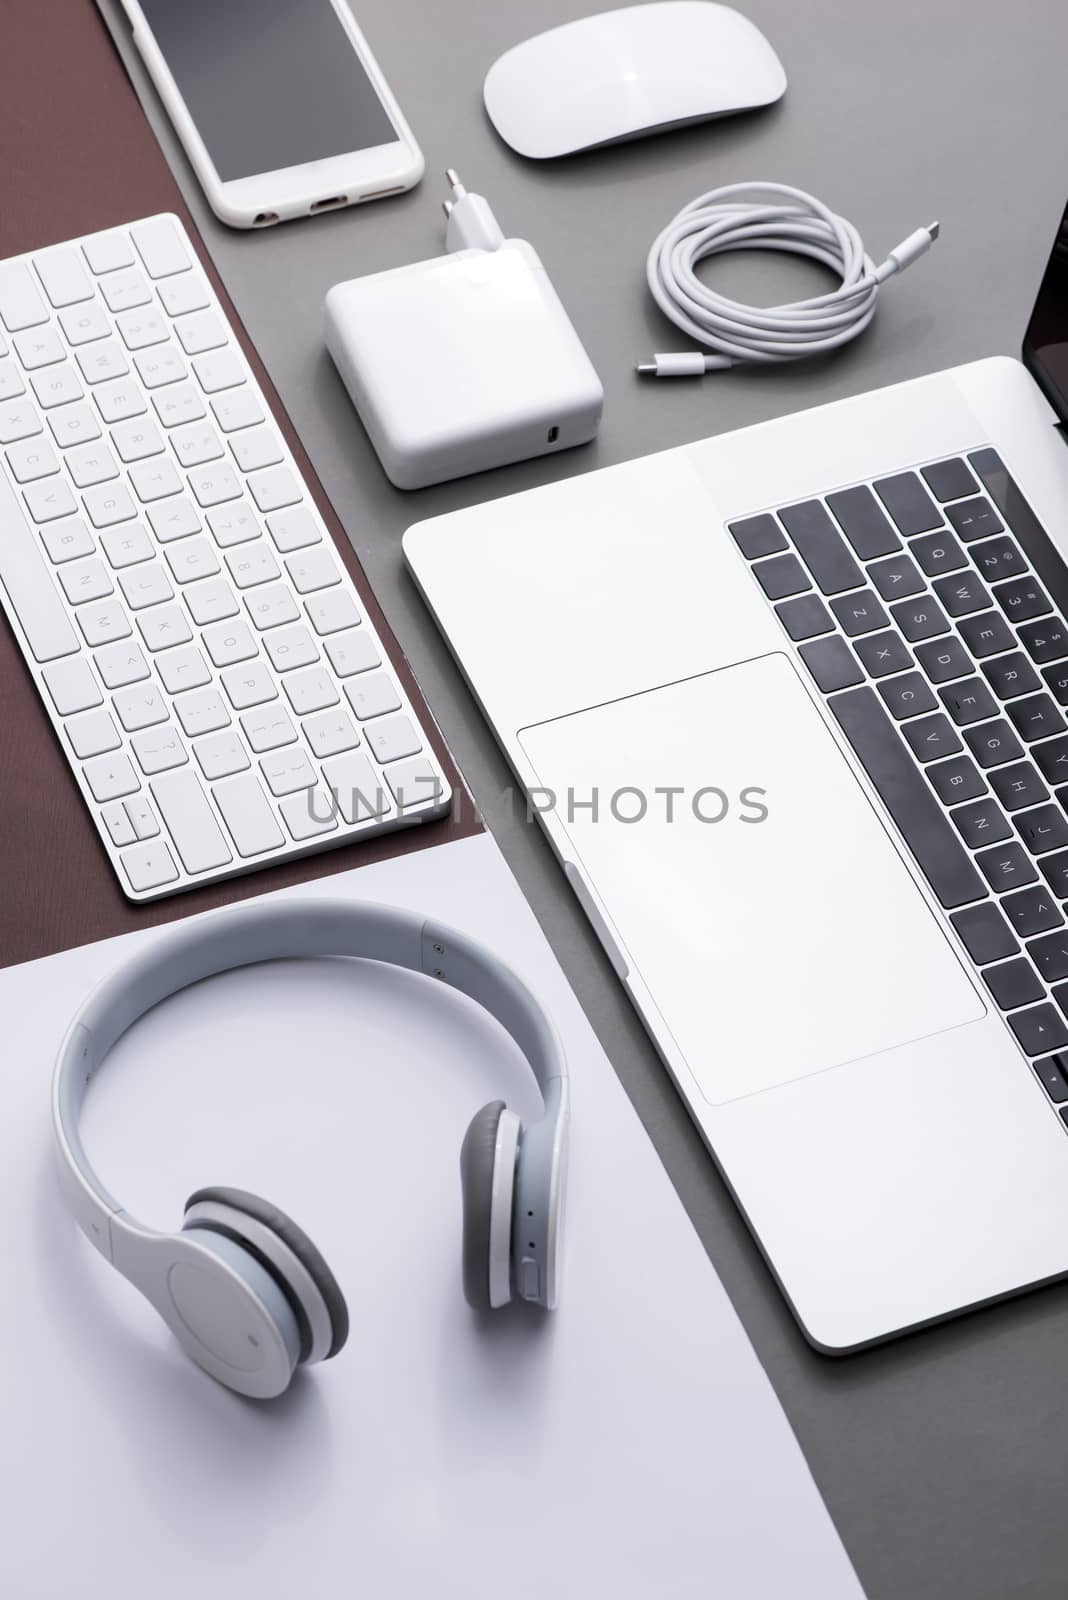 Set of black and white of office supplies and business gadgets. by makidotvn